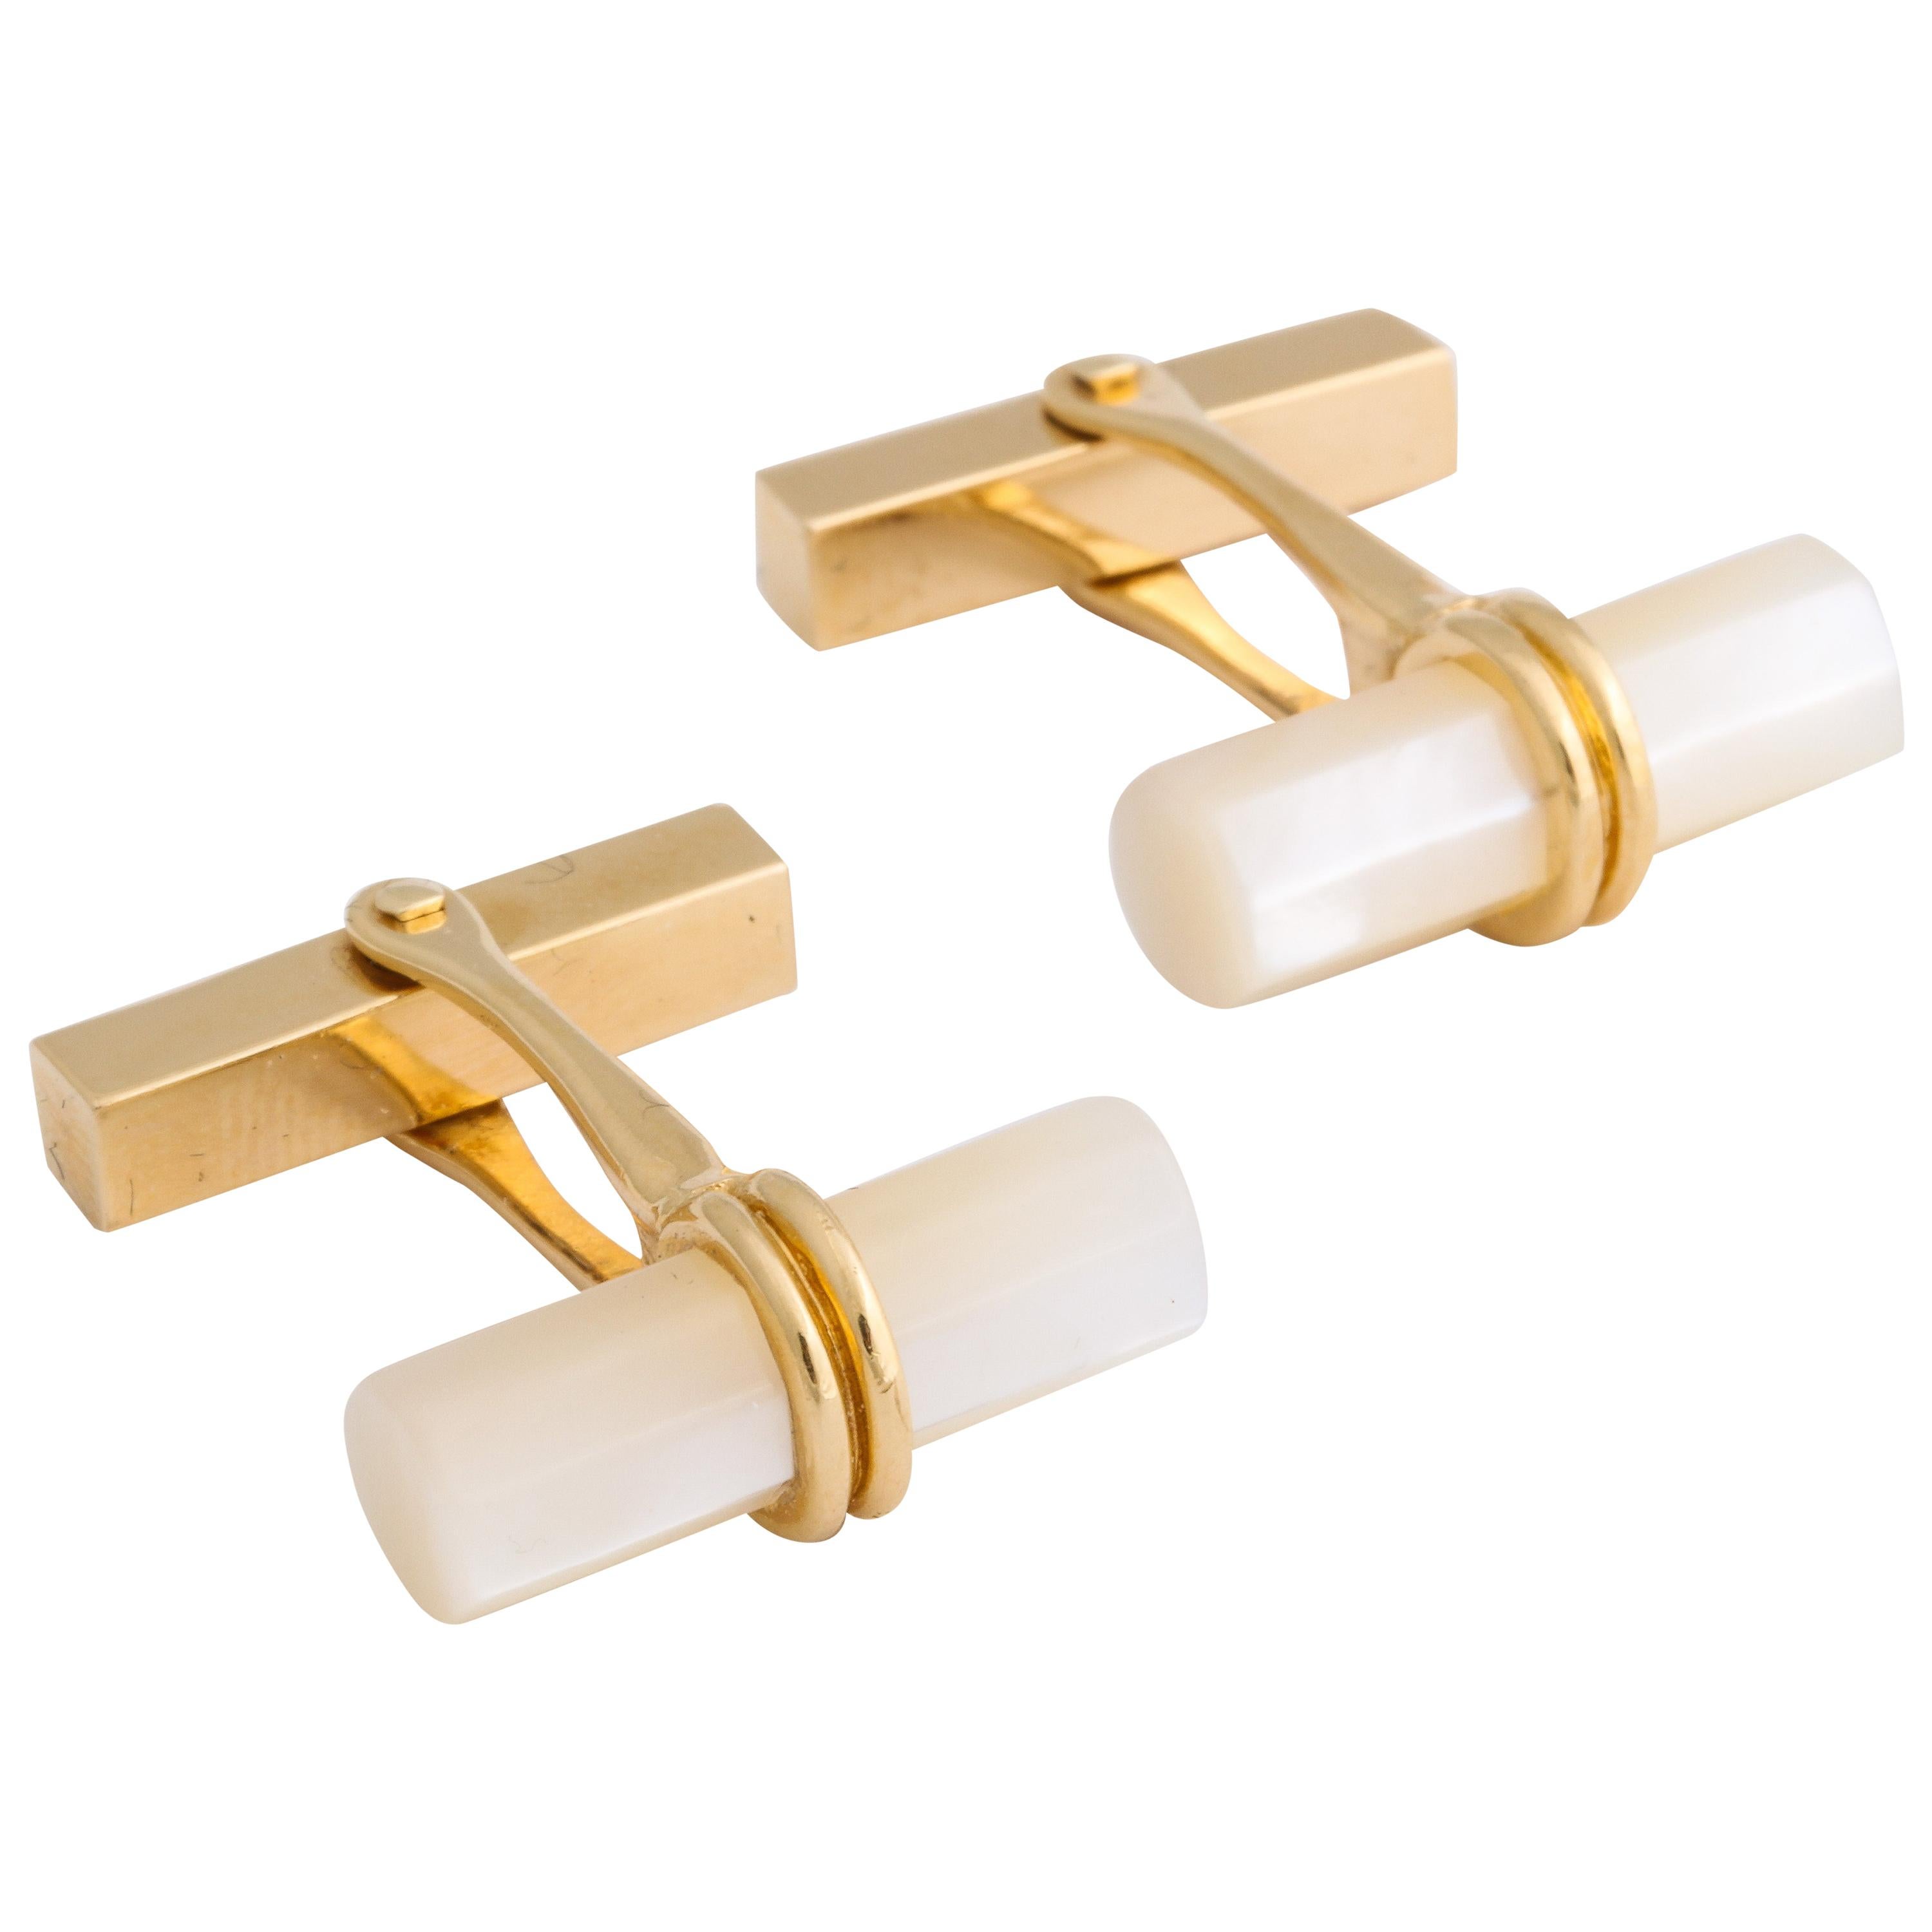 This marvelous Tiffany & Co. men's Cufflink and Dress Studs set is crafted in mother-of-pearl and yellow gold, and comes in its original box. It is marked 14K 585 and is in pristine condition. 

